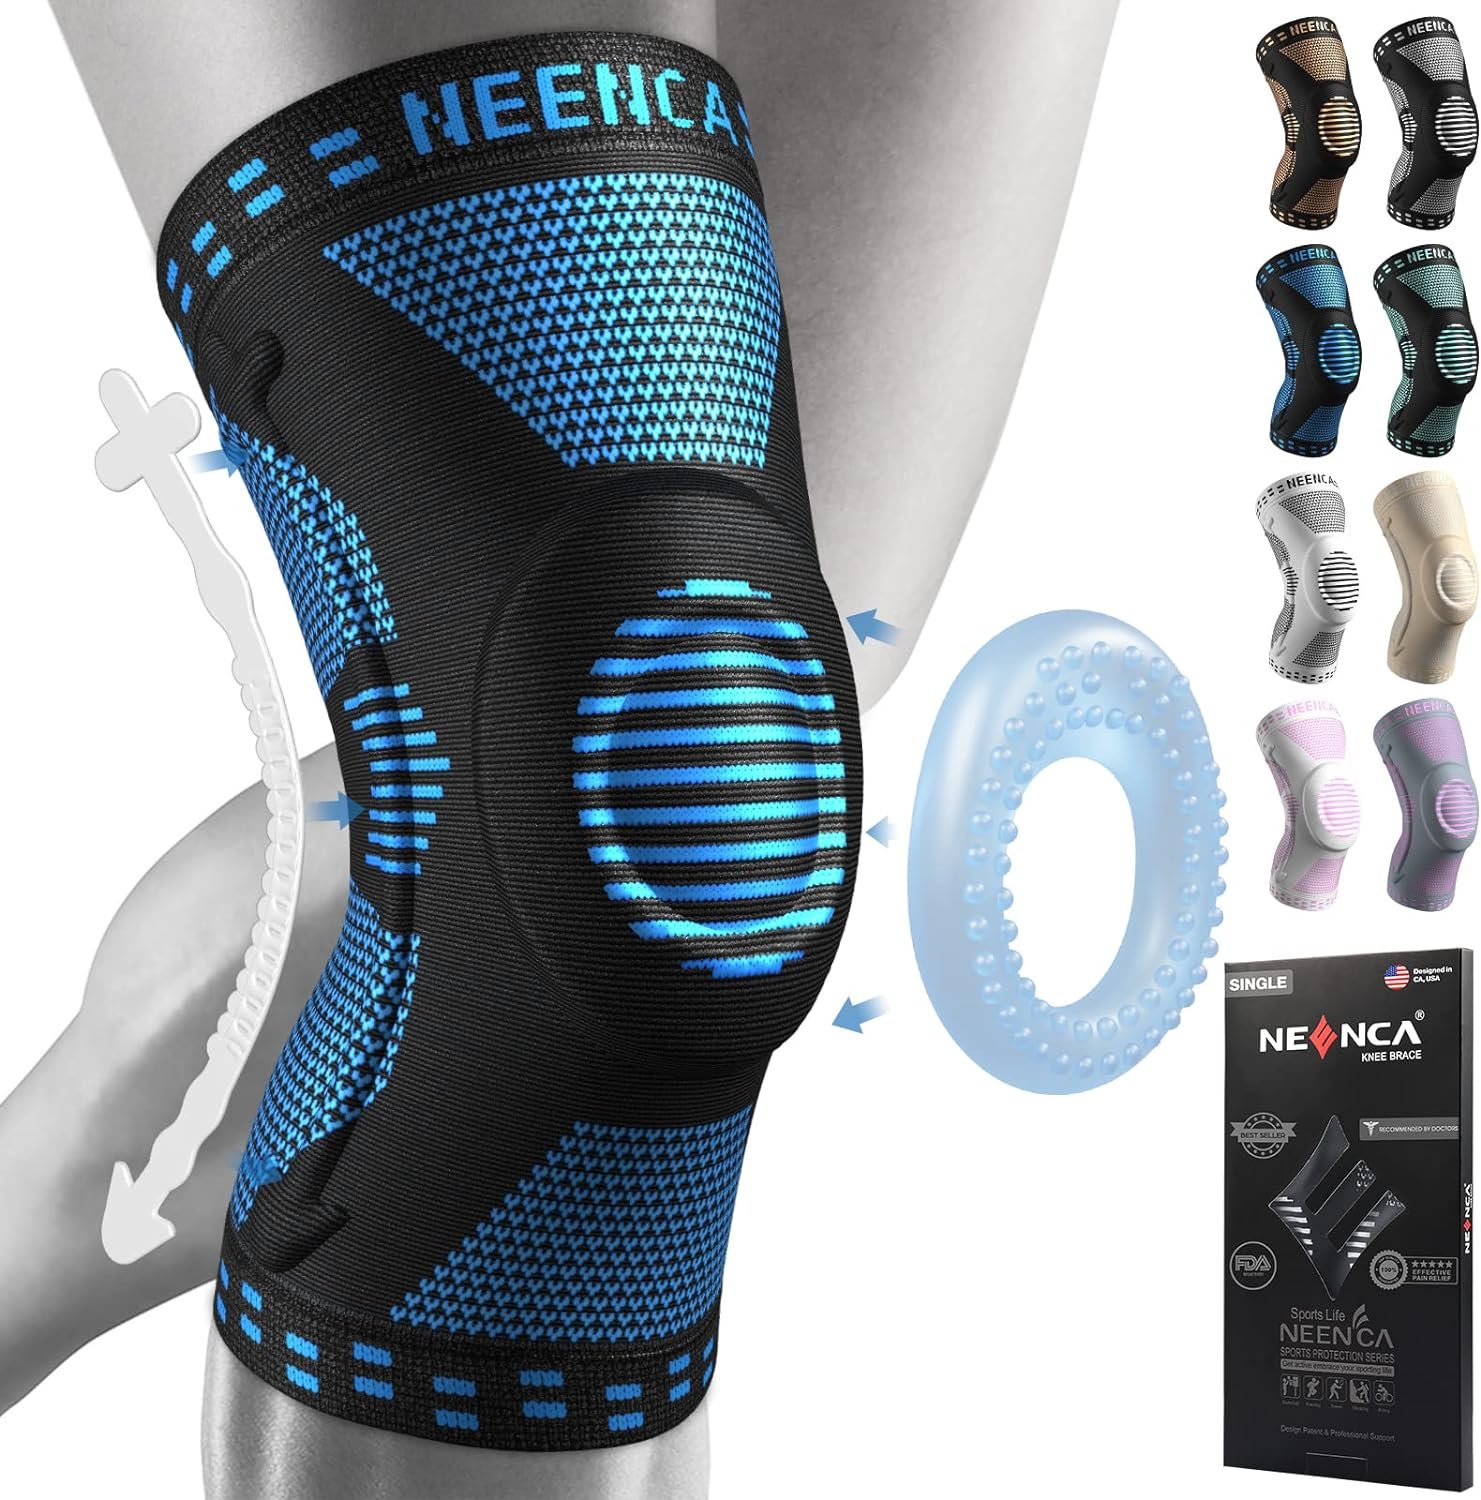 NEENCA Professional Knee Brace, Compression Knee Support with Patella Gel Pad  Side Stabilizers, Medical Knee Sleeve for Pain Relief, ACL,PCL, Meniscus, Injury Recovery, Arthritis, Sports, Workout...